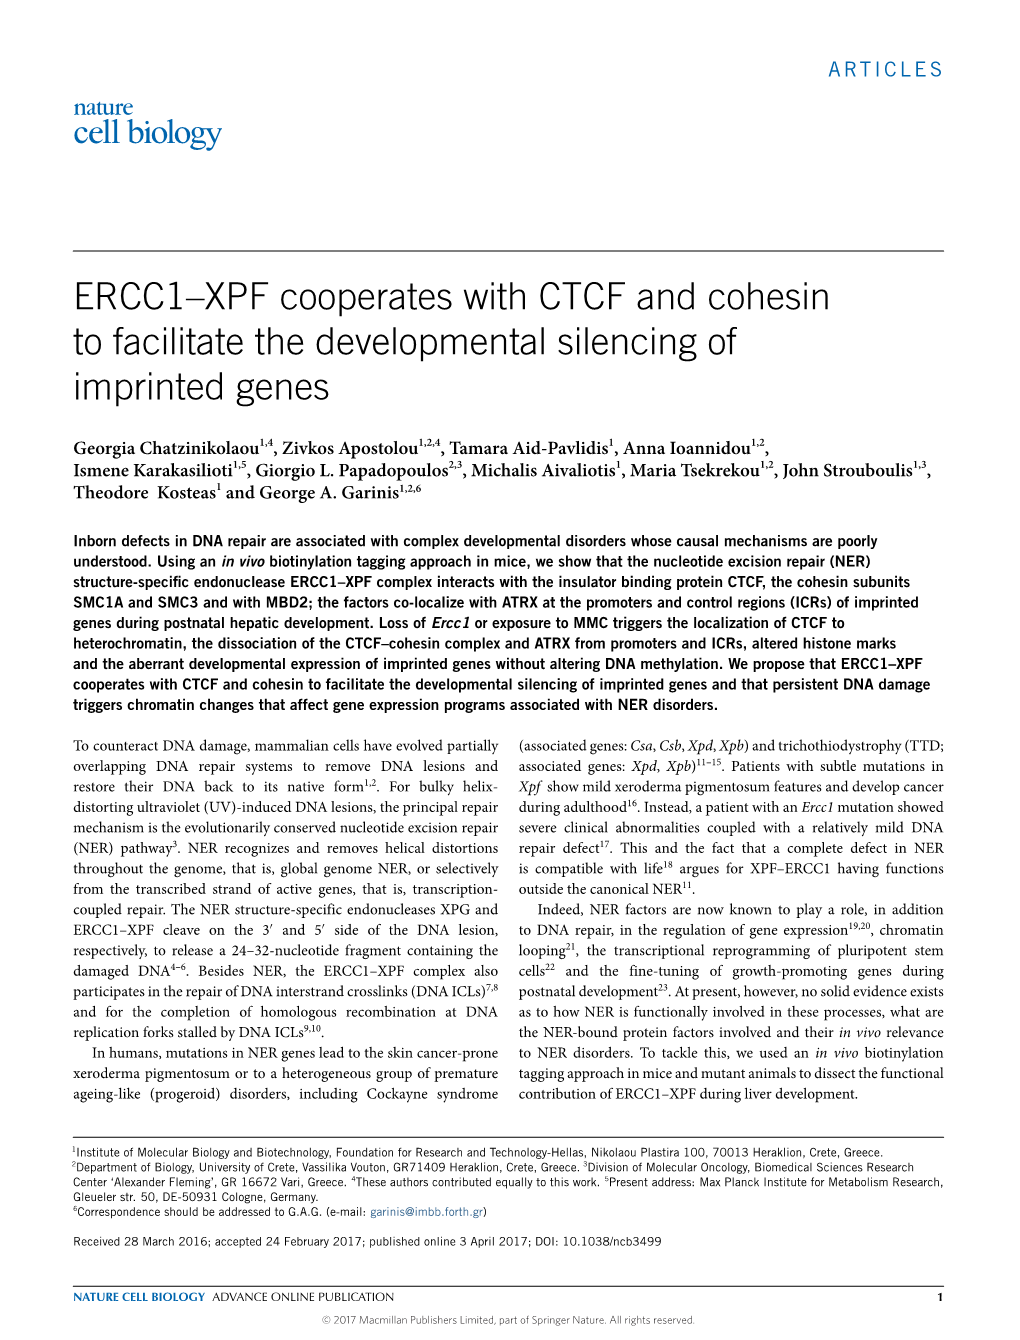 ERCC1–XPF Cooperates with CTCF and Cohesin to Facilitate the Developmental Silencing of Imprinted Genes